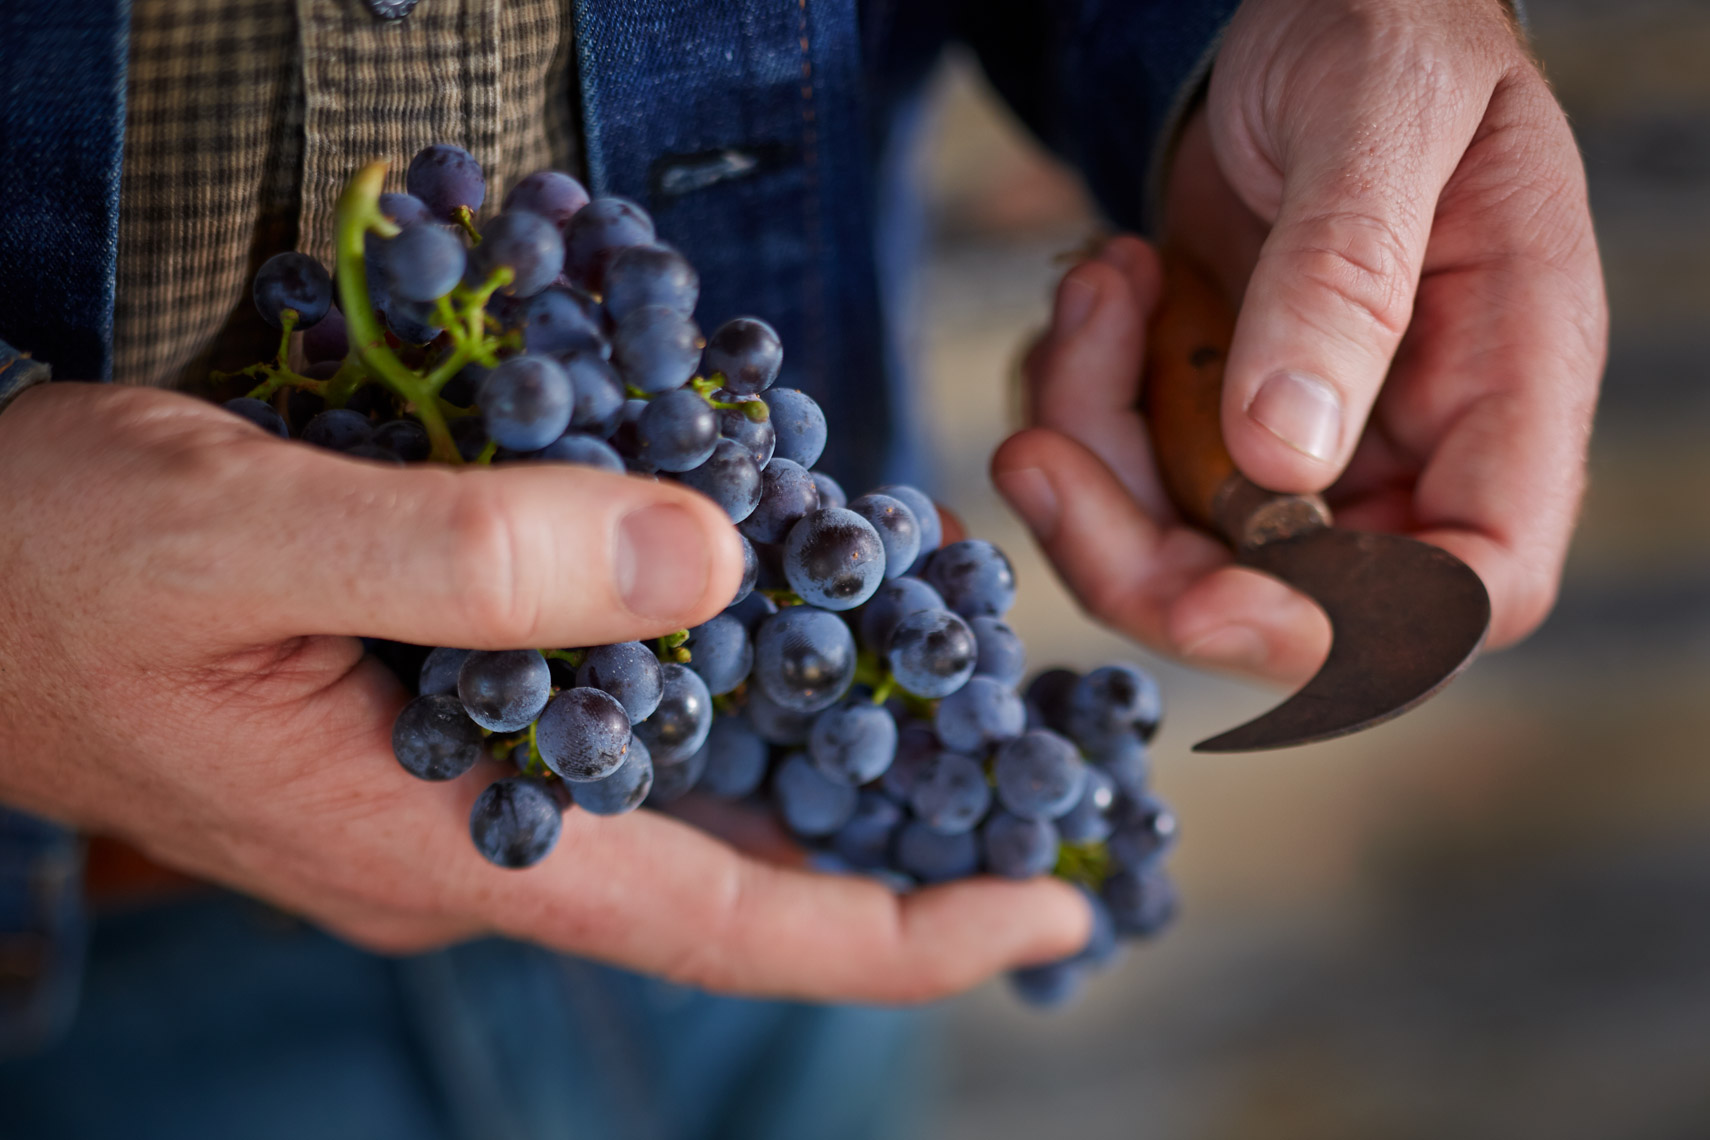 AlanCampbellPhotography, grapes and a harvesting hook